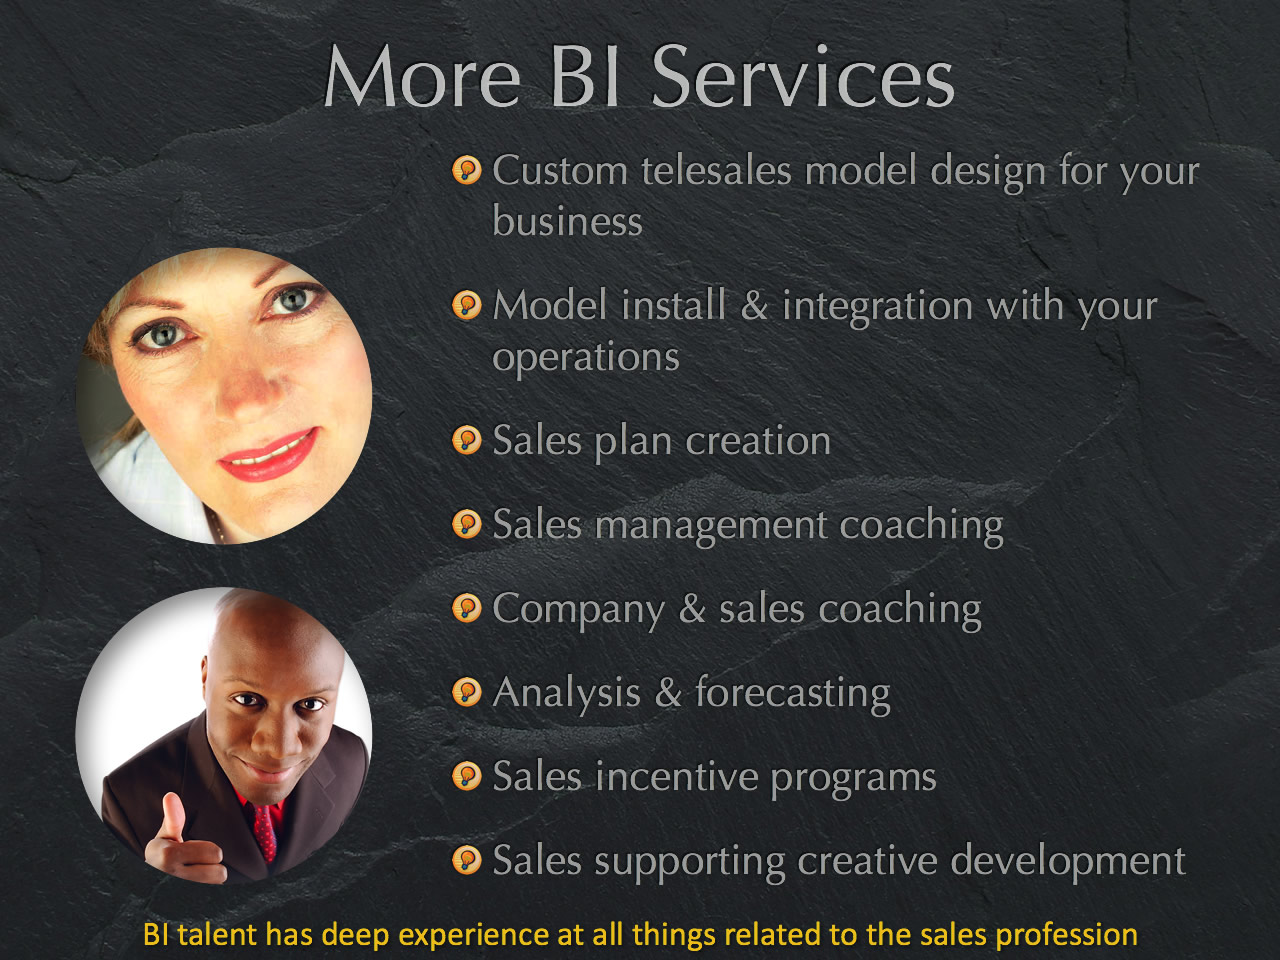 Even more sales team-improving services offered by Big Innovations consultants